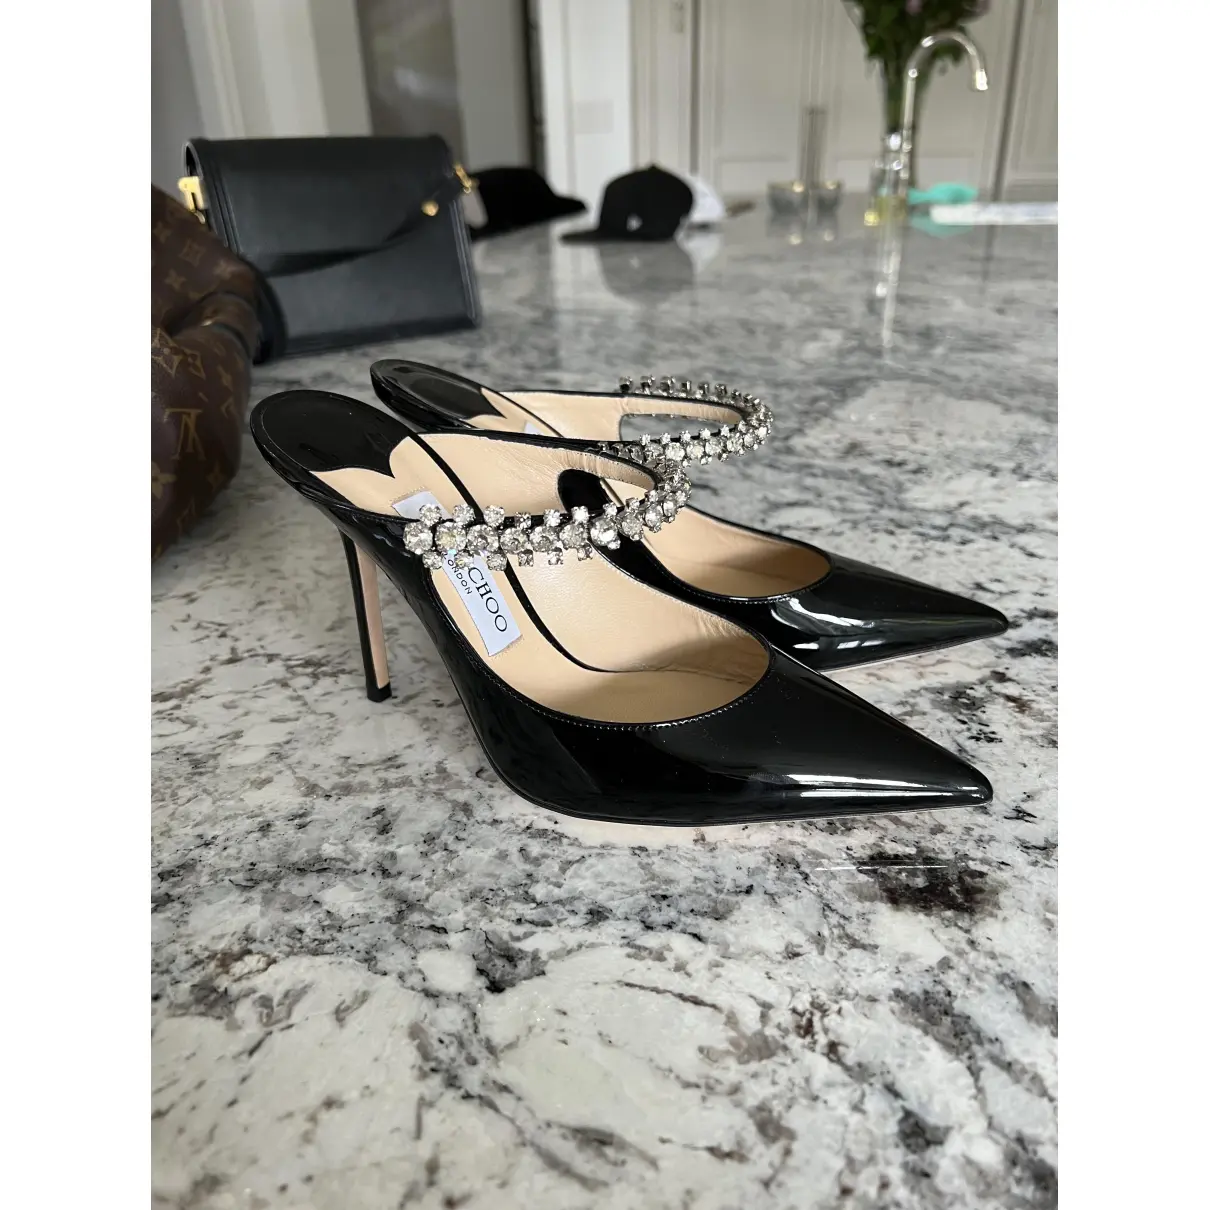 Buy Jimmy Choo Patent leather mules & clogs online